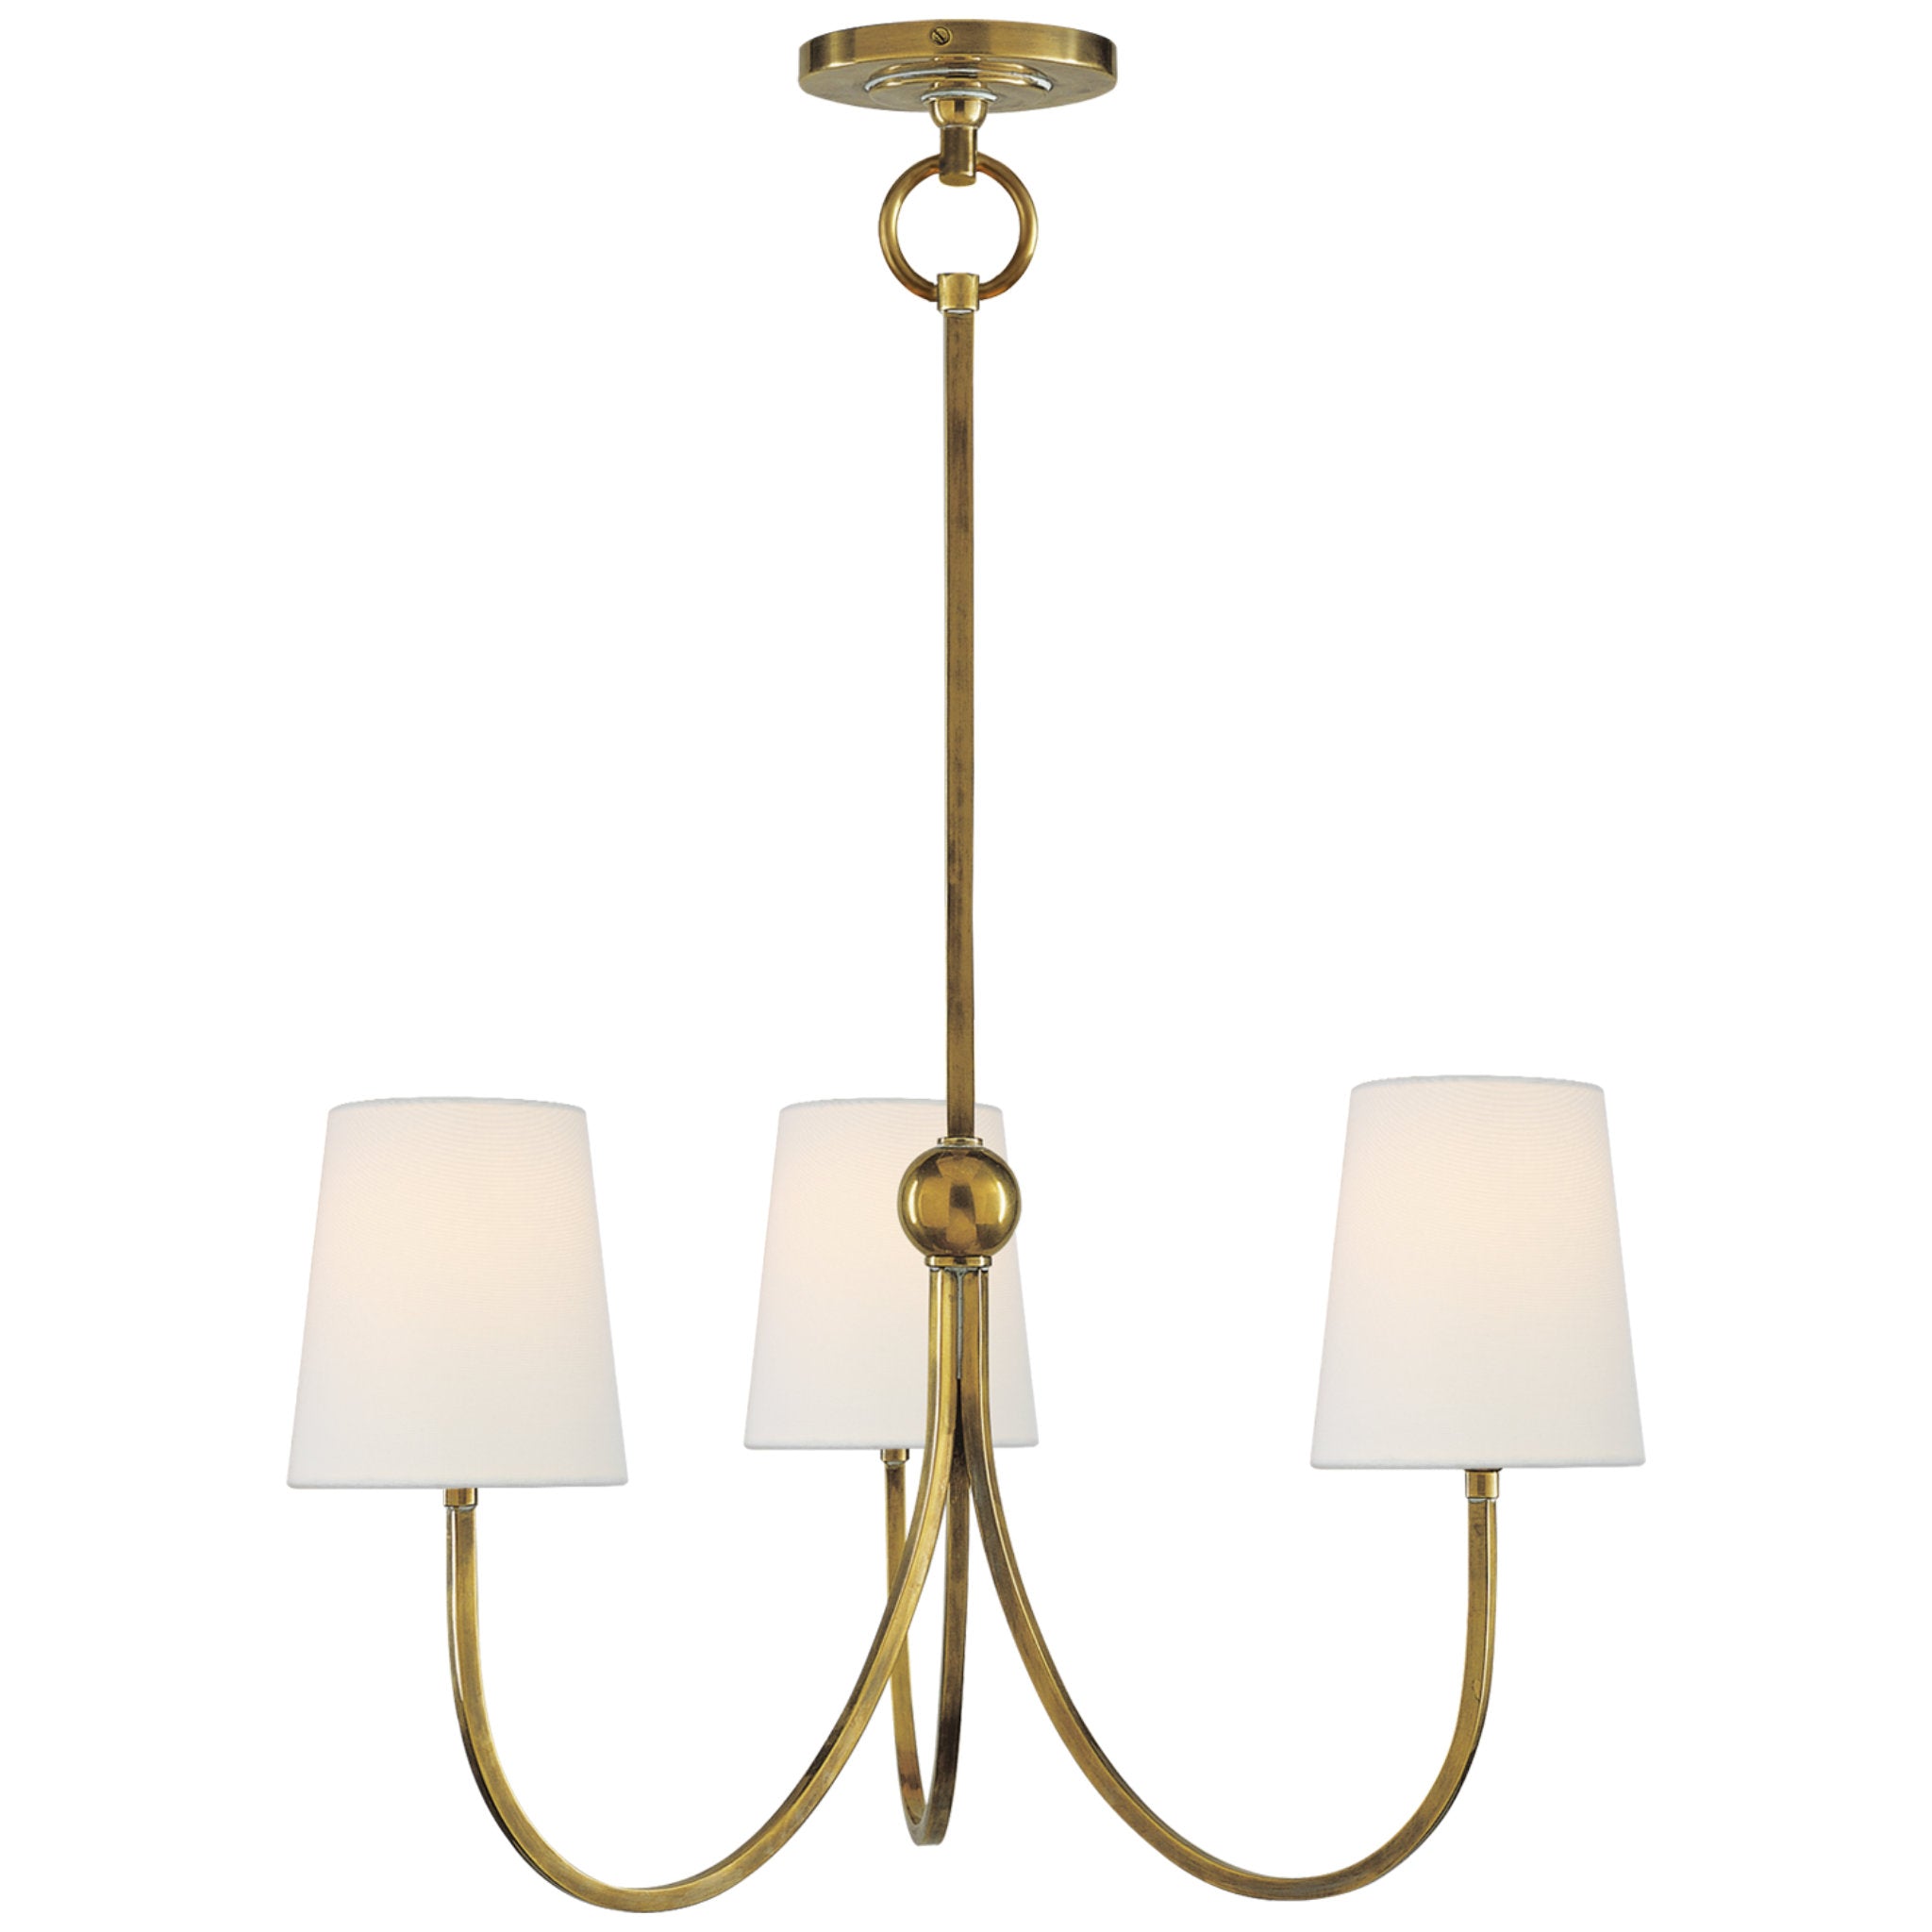 Thomas O'Brien Reed Small Chandelier in Hand-Rubbed Antique Brass with